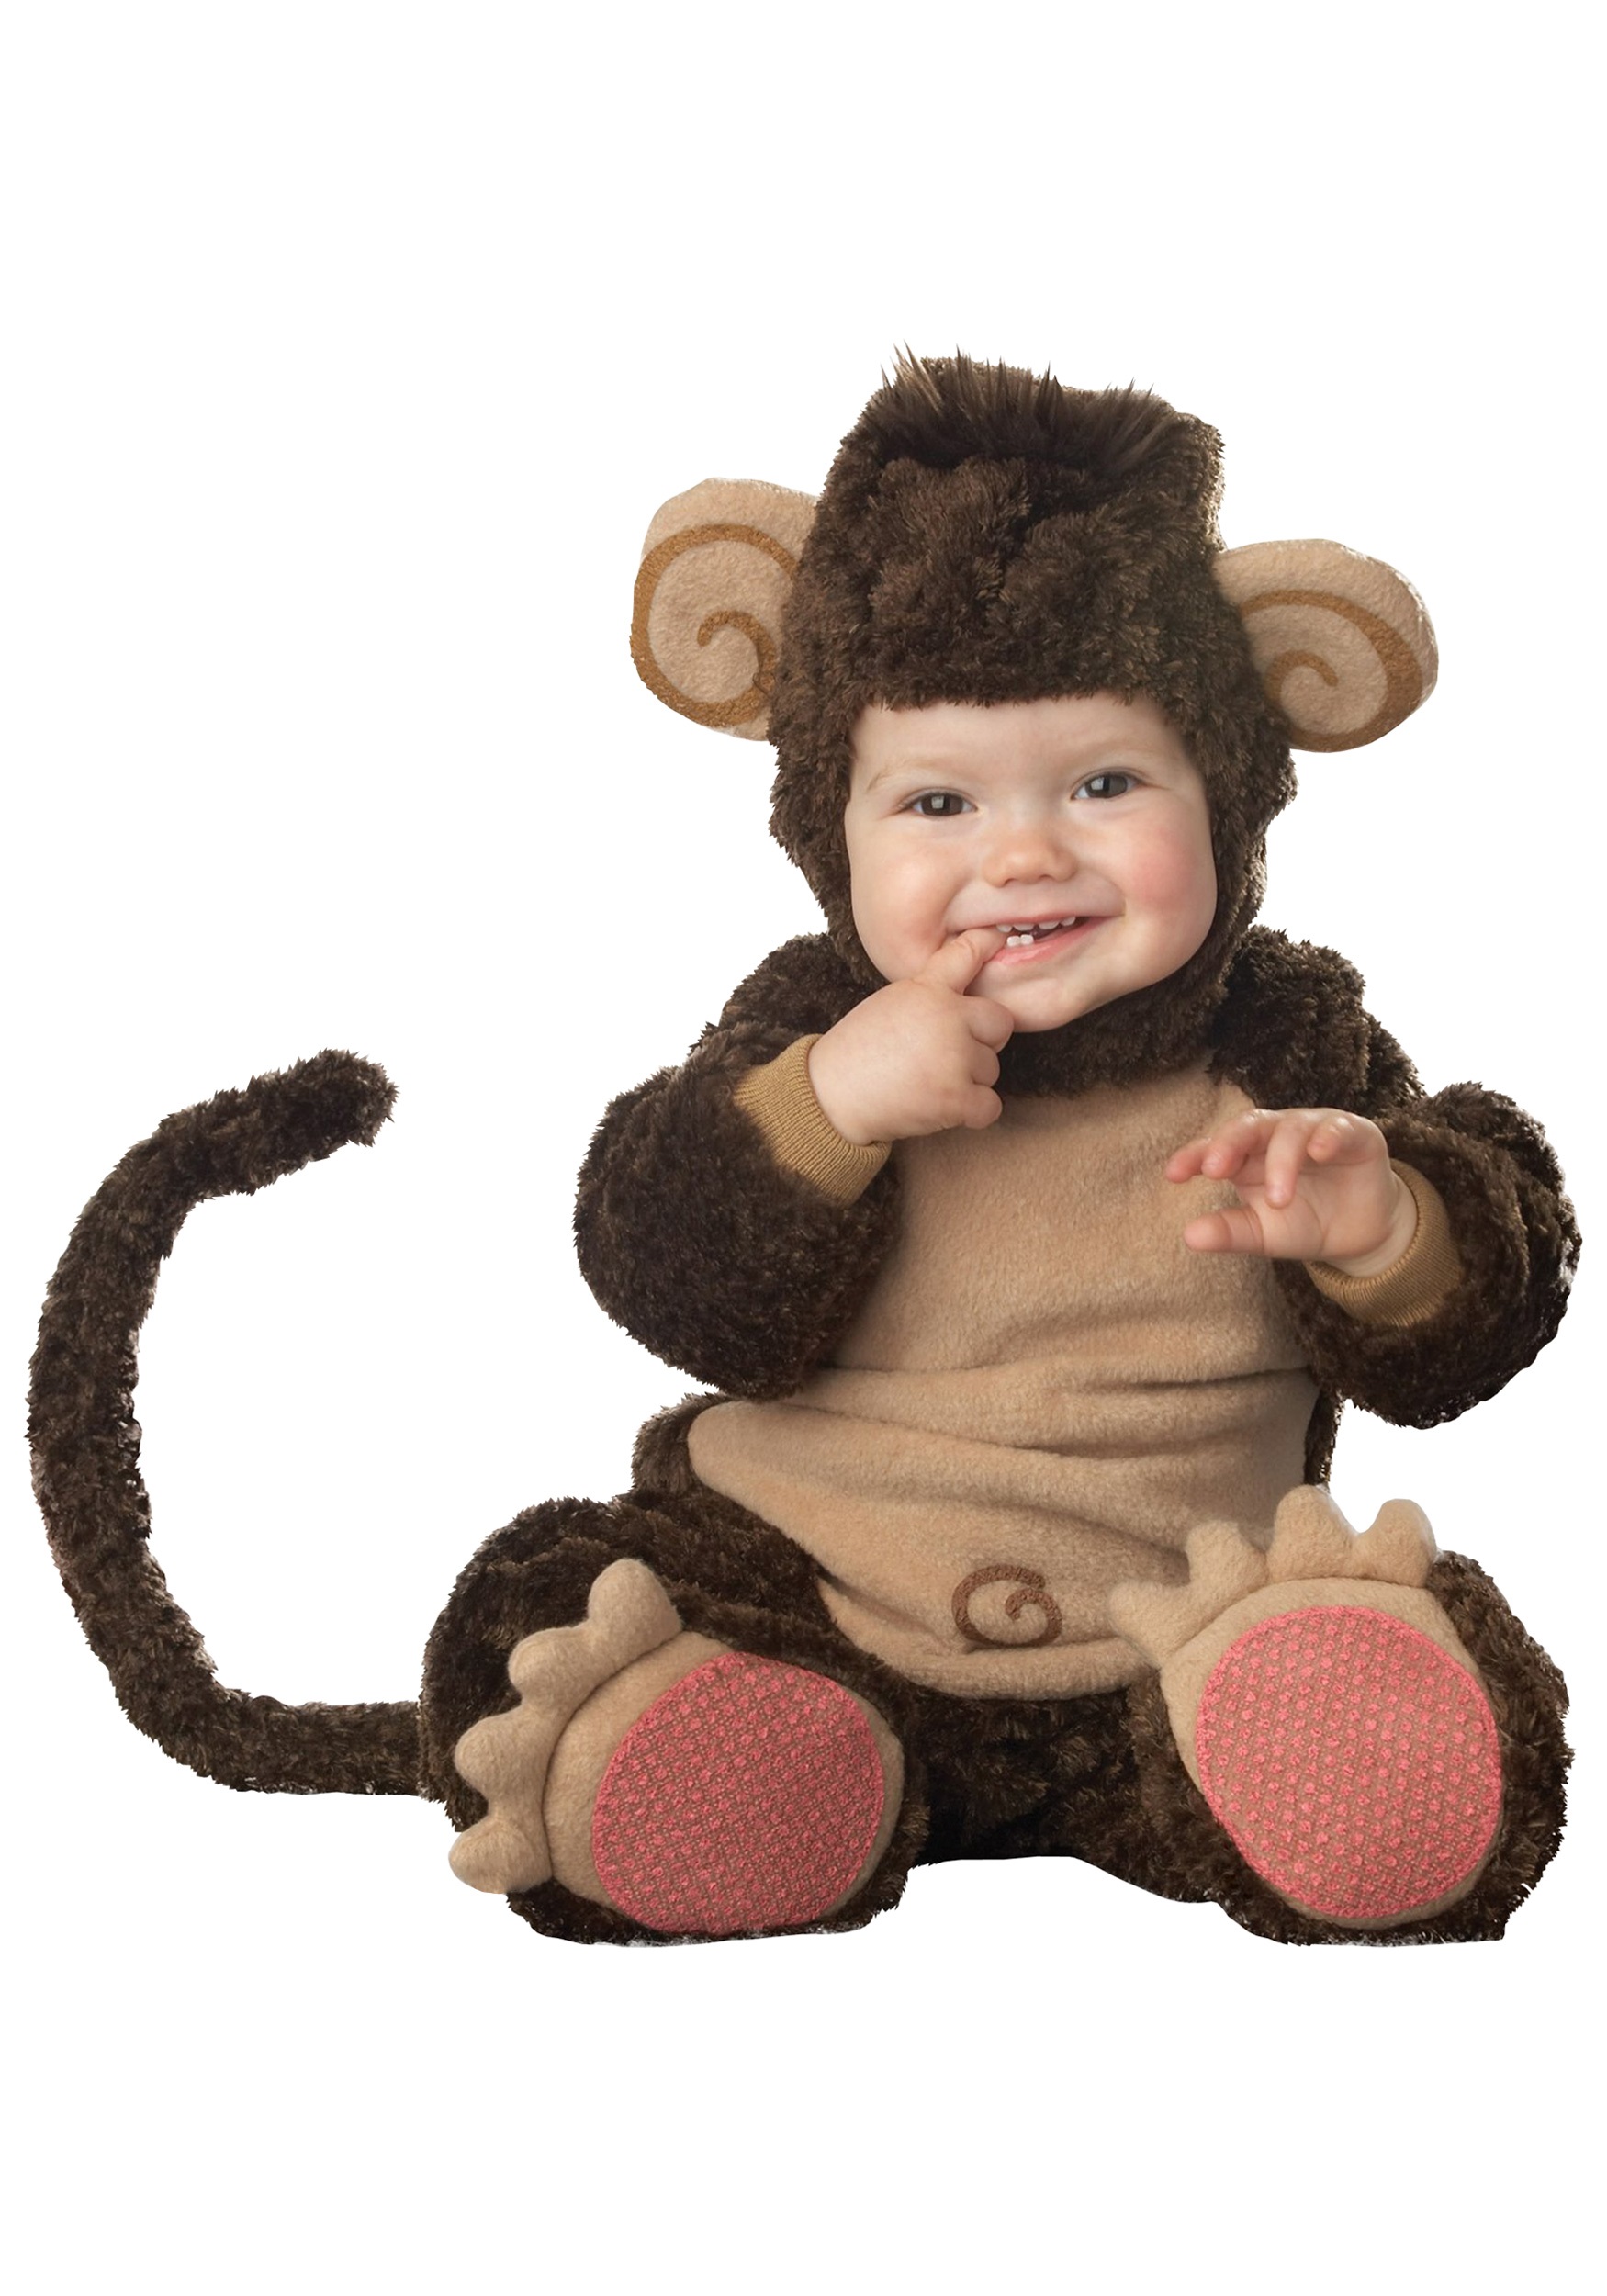 Lil Monkey Costume For Baby